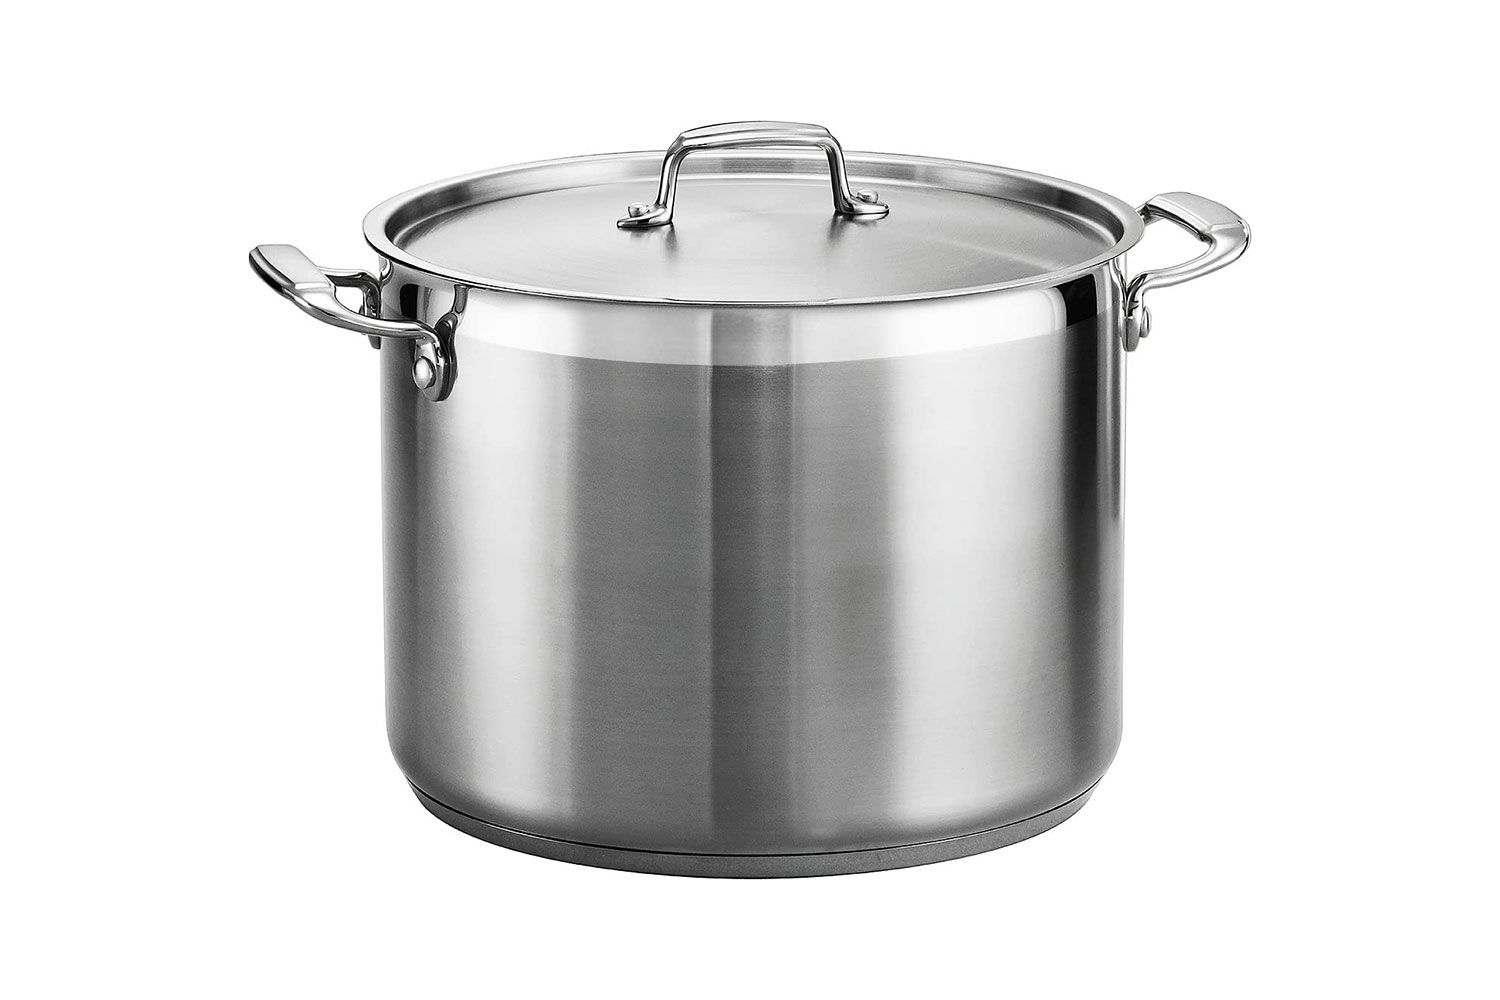 Tramontina 16-Quart Gourmet Stainless Steel Covered Stock Pot